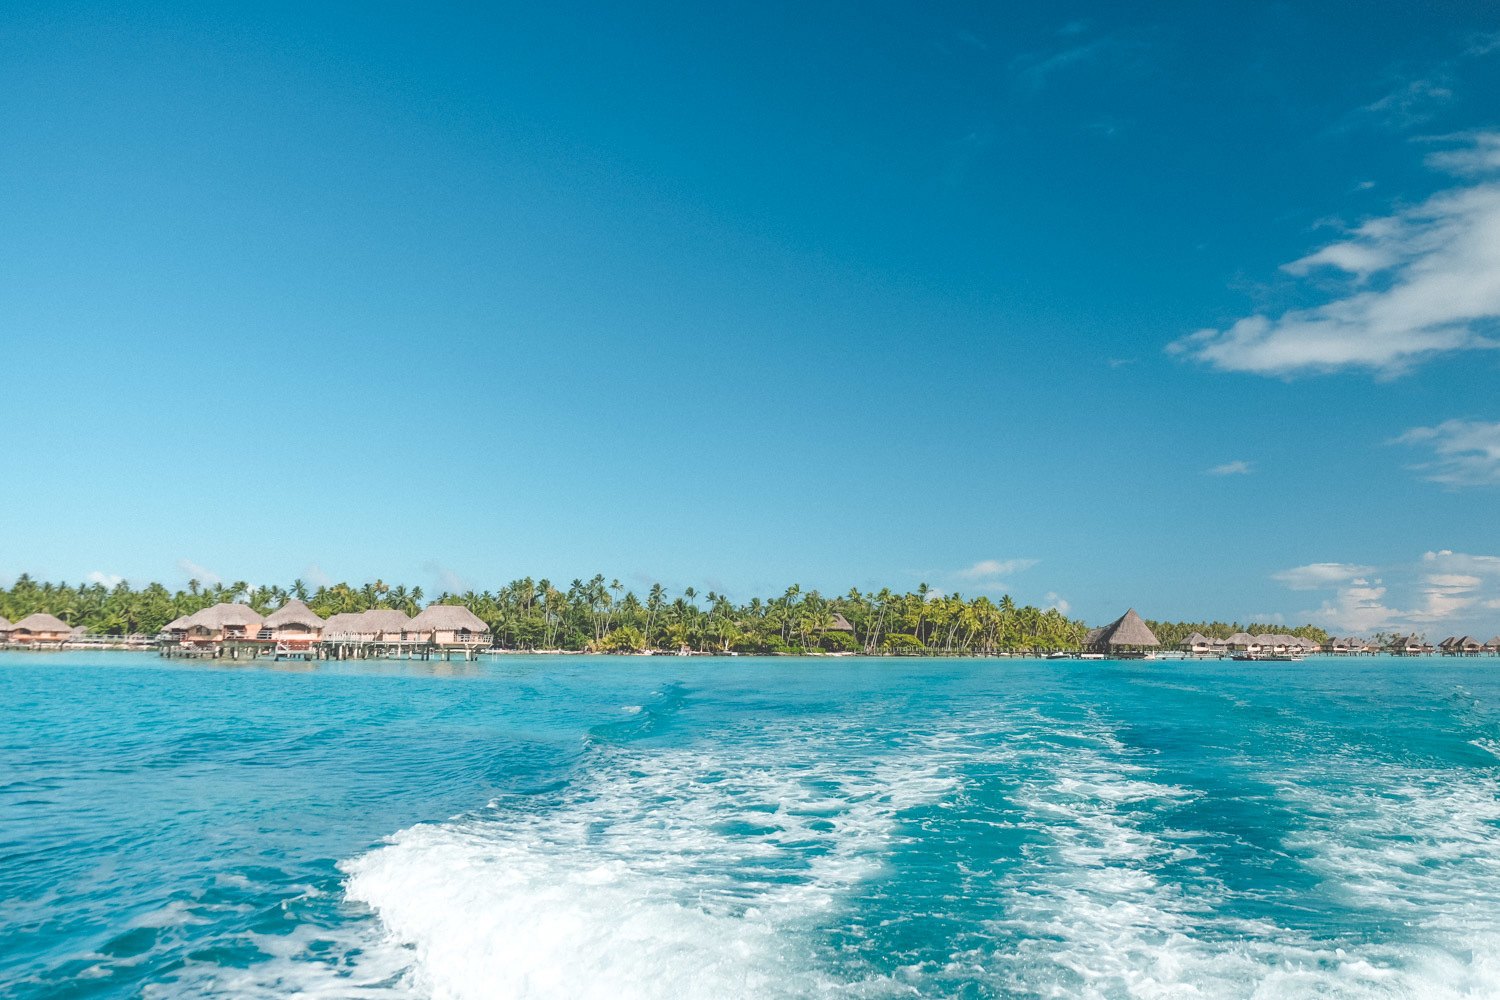 Water boating in French Polynesia